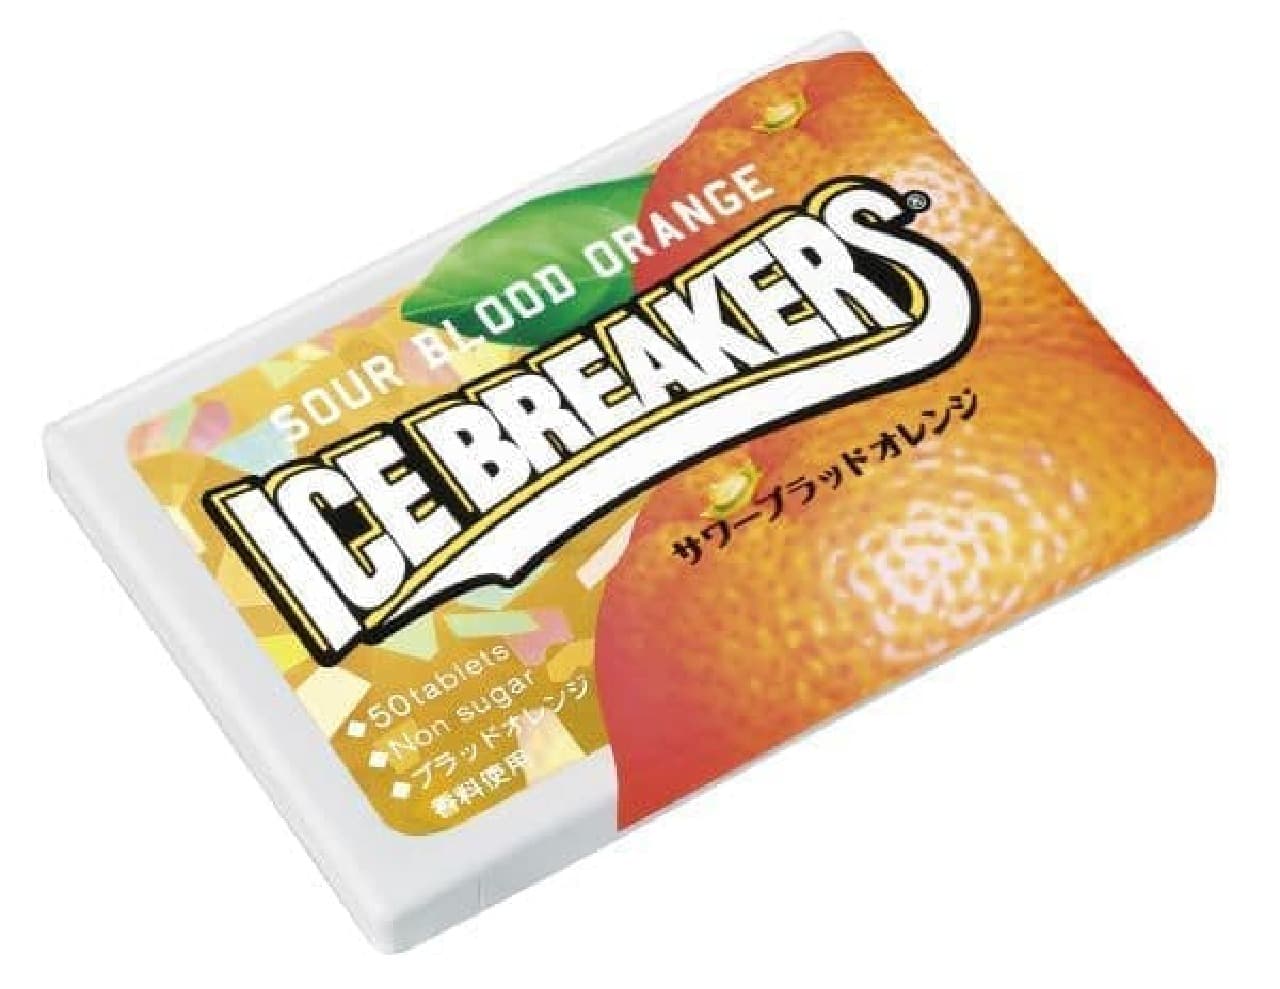 "Ice Breakers" with impressive commercials